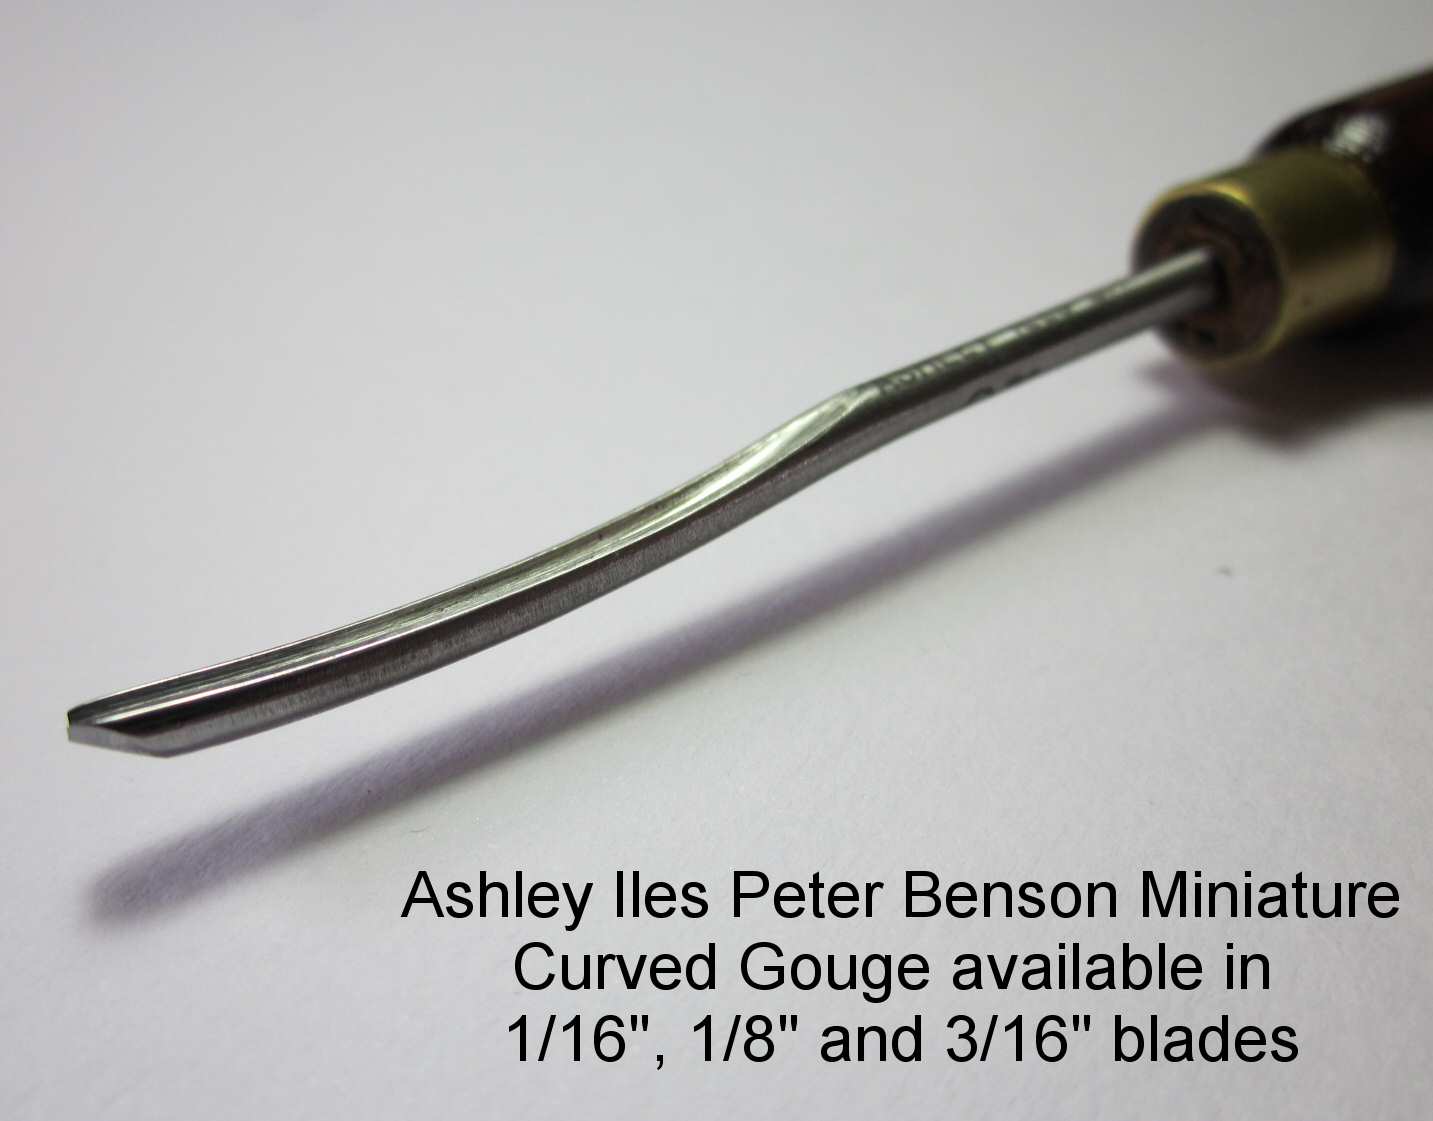 1/16" (1.5mm) Peter Benson Miniature Curved Gouge (Sweep 18)